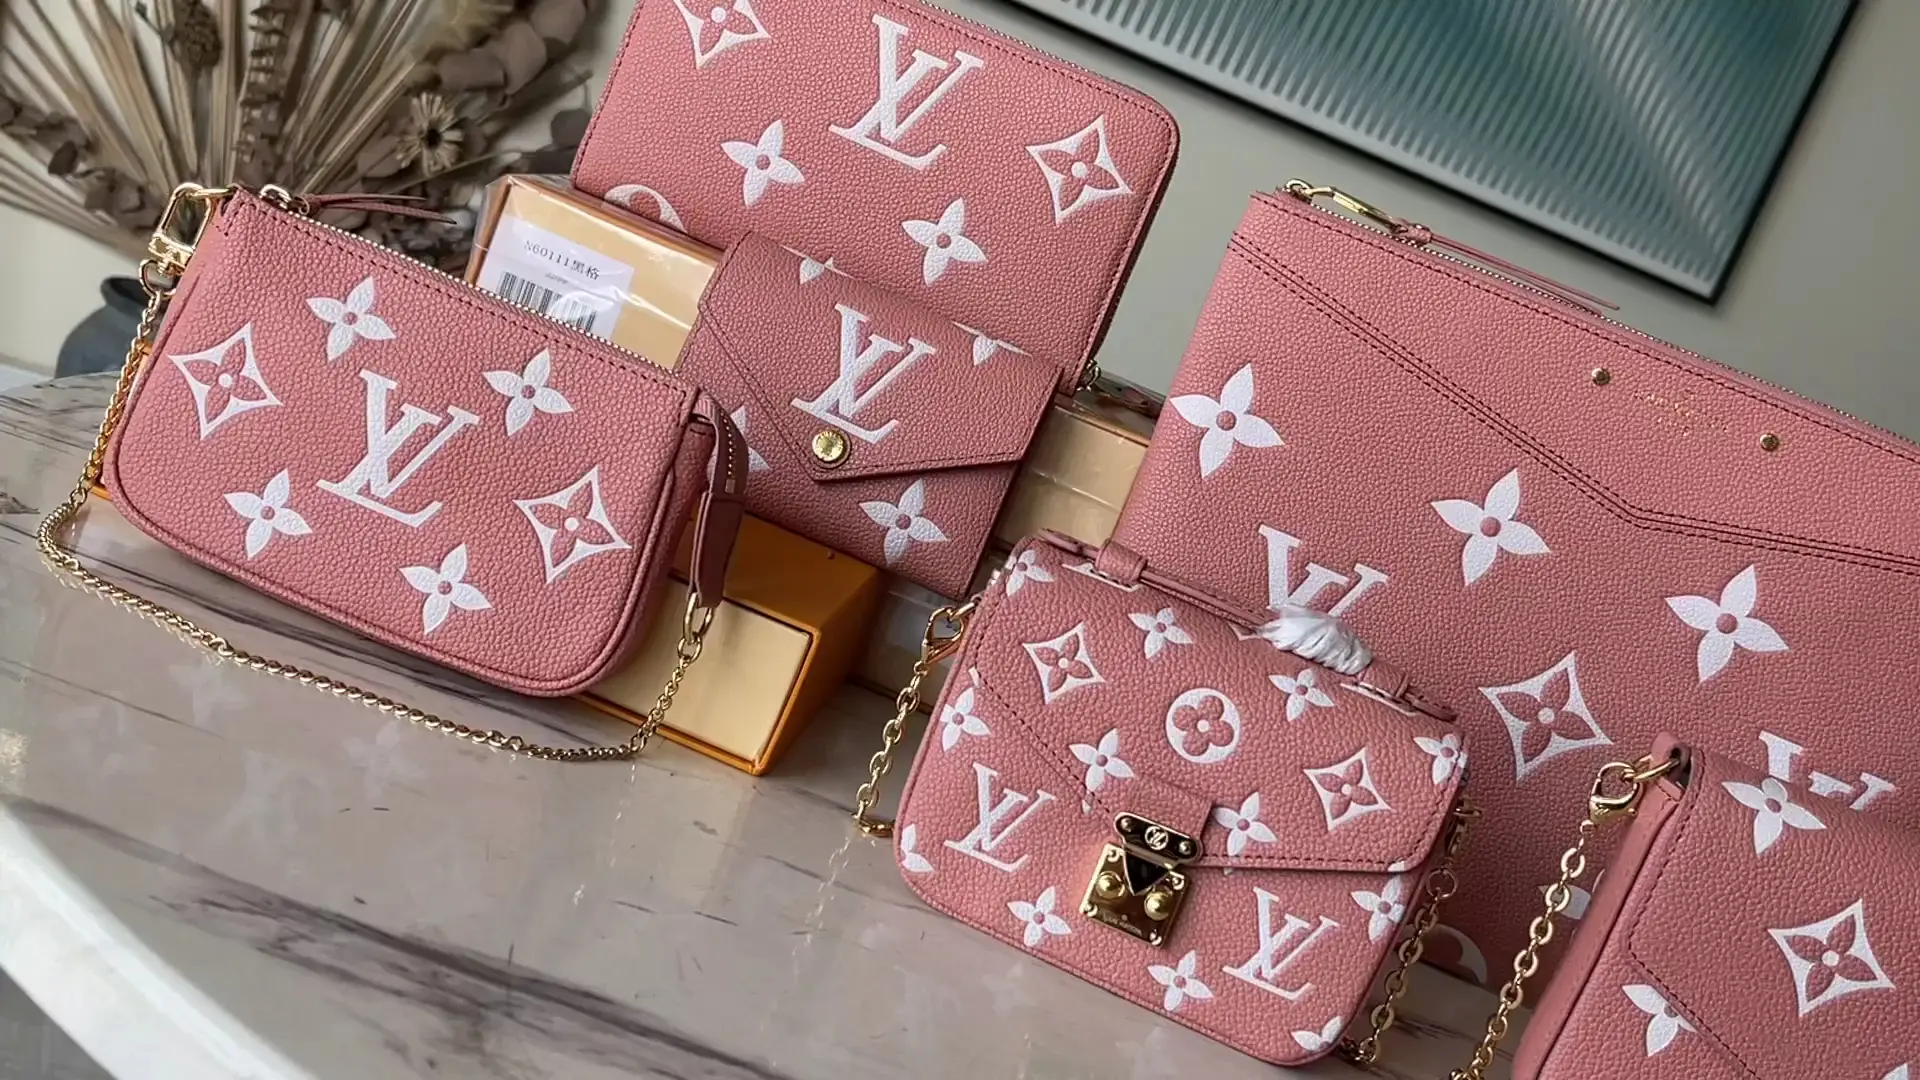 My Last Dhgate Unboxing for Now: Nice BB Vanity and Multi Pochette  Accesoires